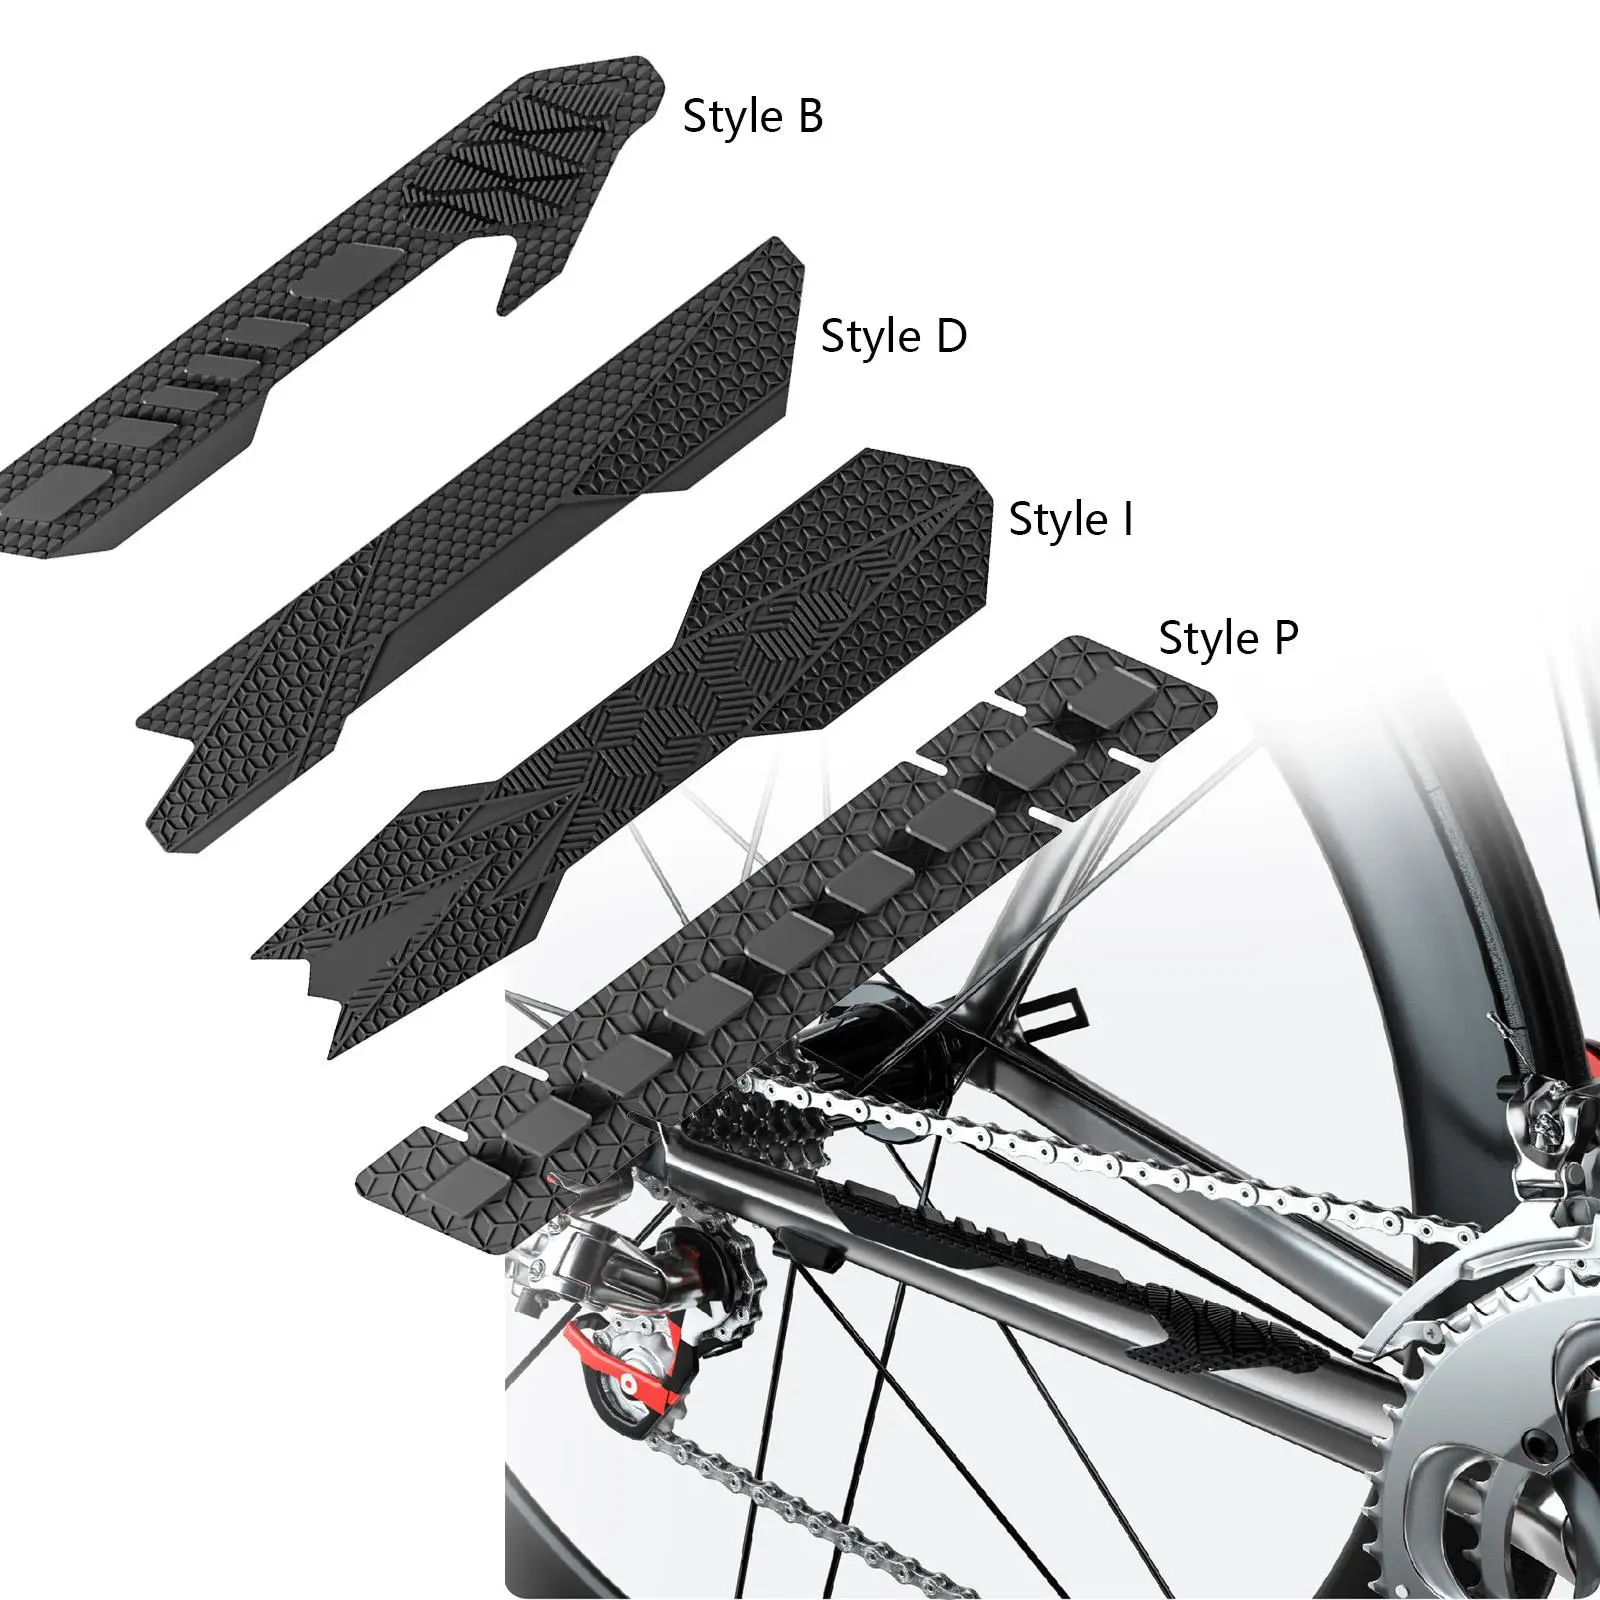 Bike Chainstay Protector, Silicone Material Guard for Chain Sticker, Bicycle Frame Paster Protective Pad, Wear Resistant